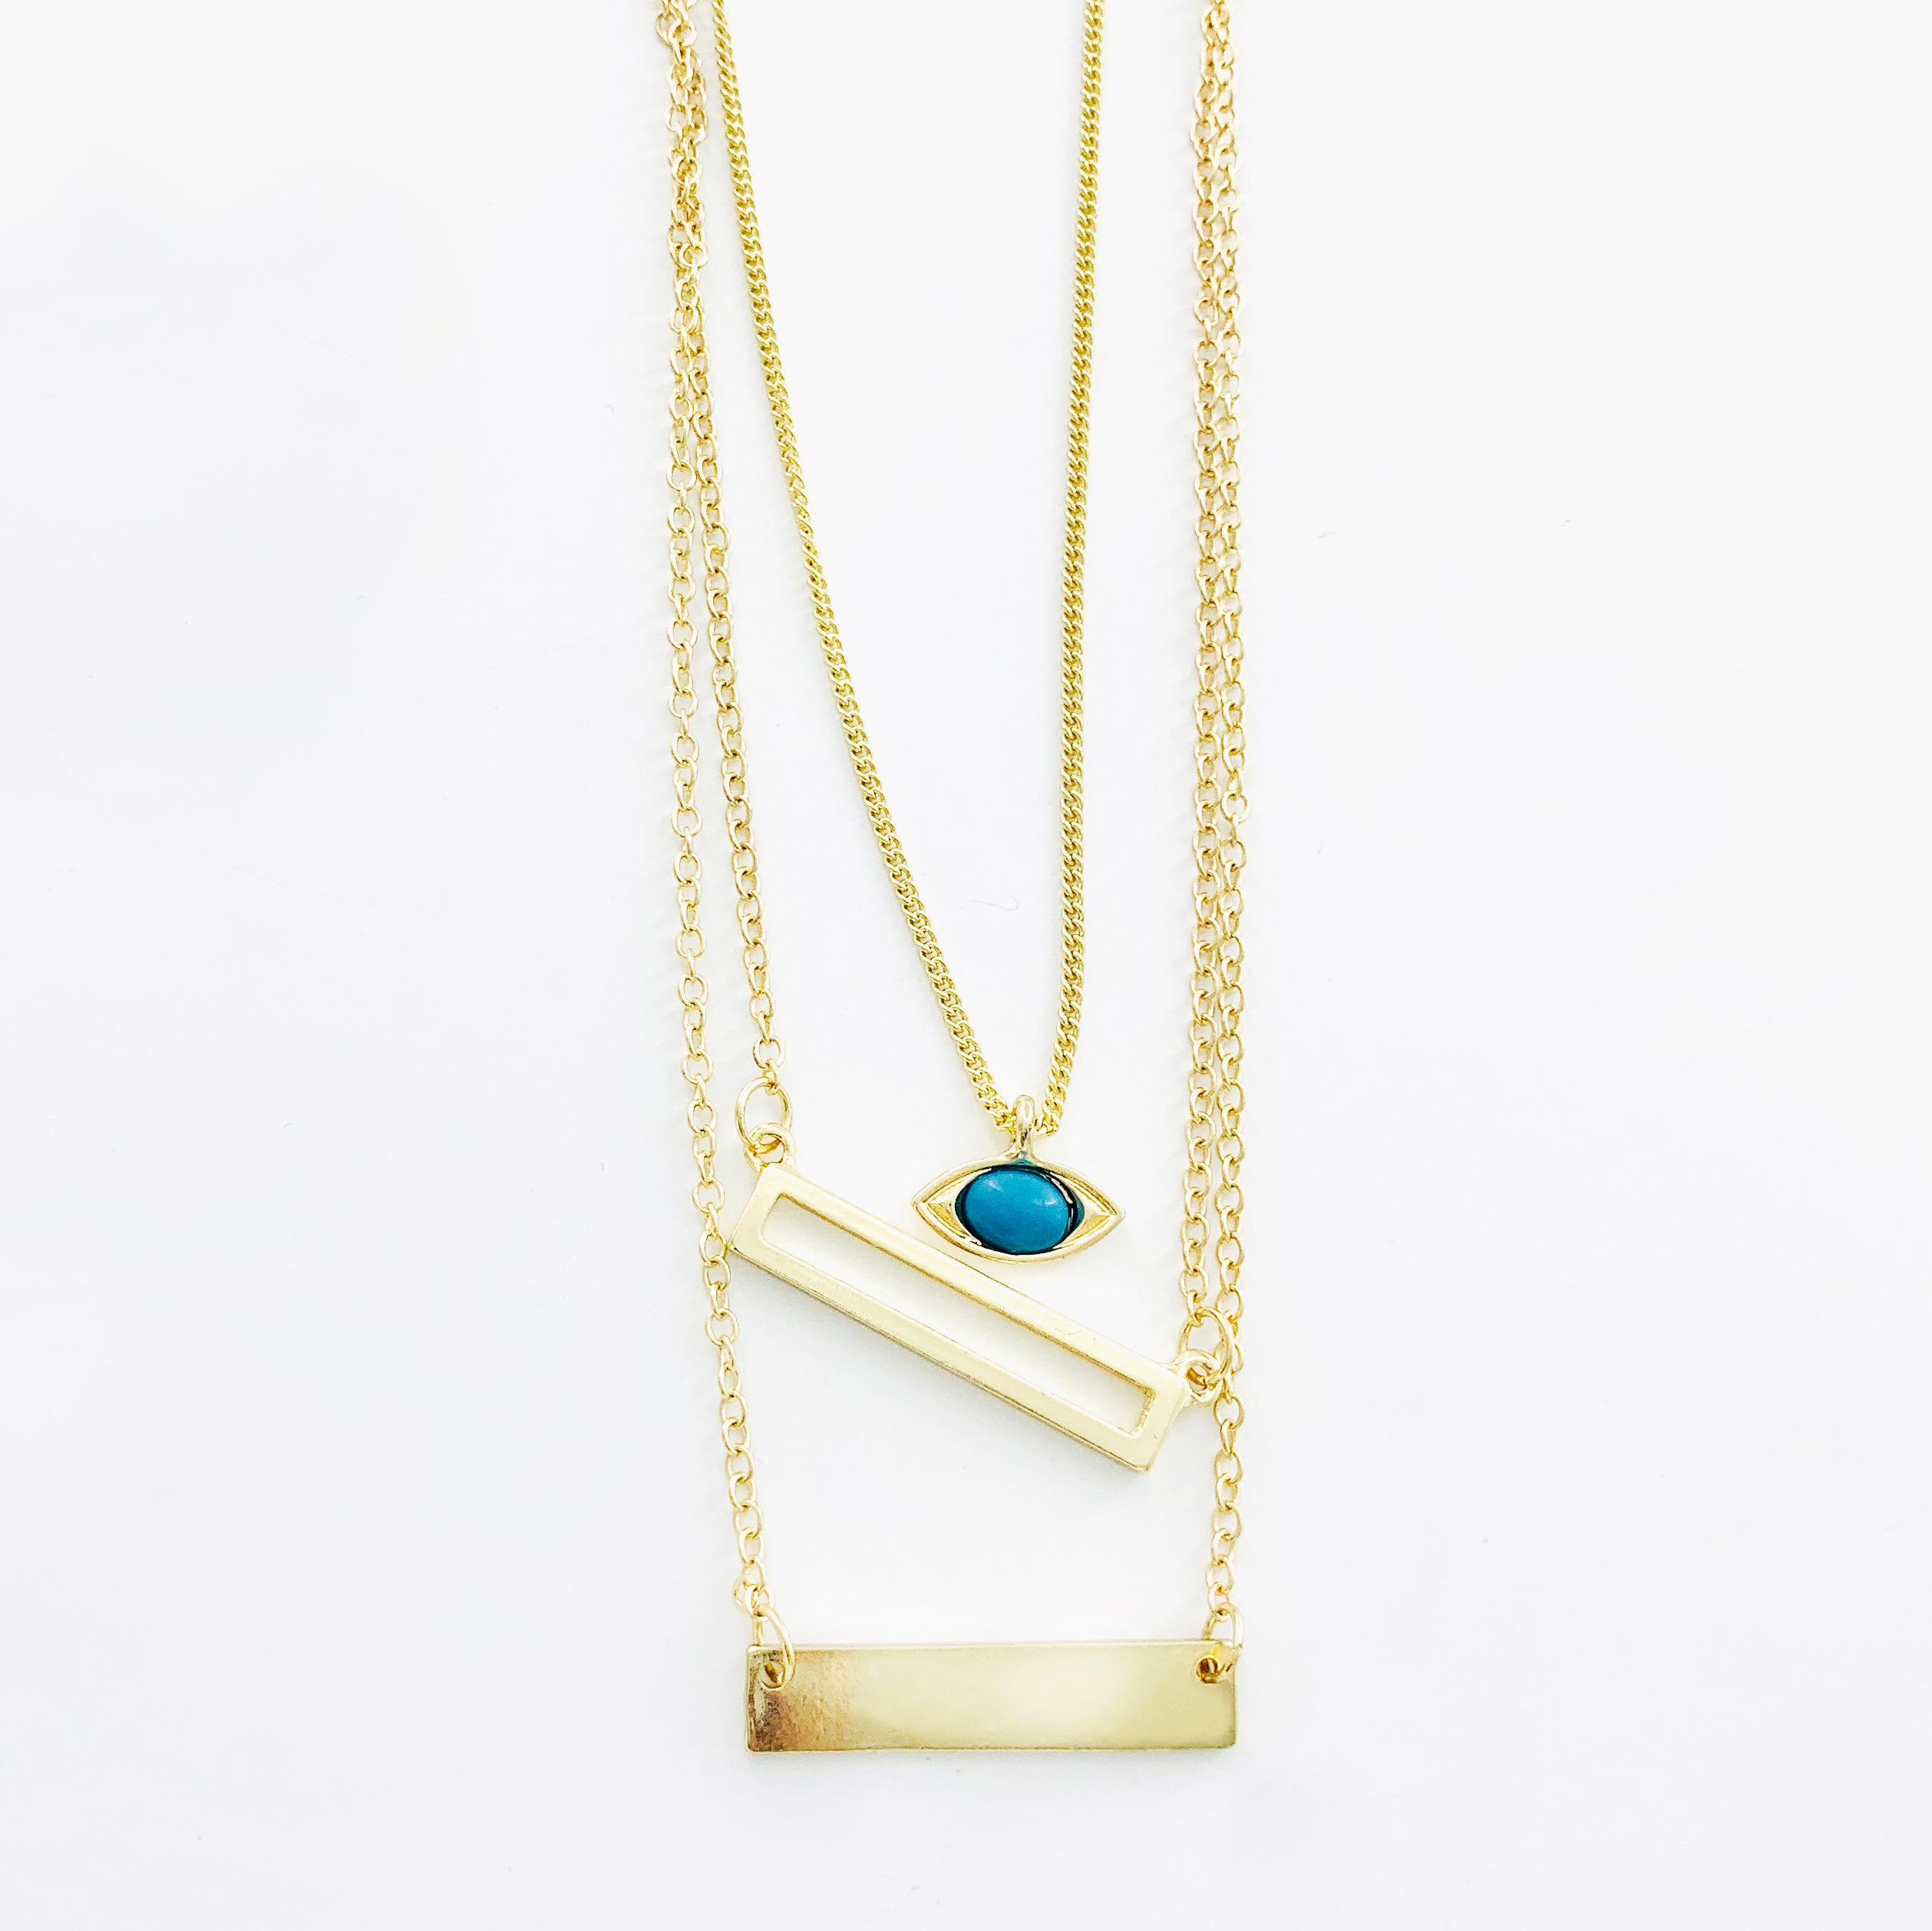 Necklace - Blue Turquoise Eye Pendant on Triple Gold Chain